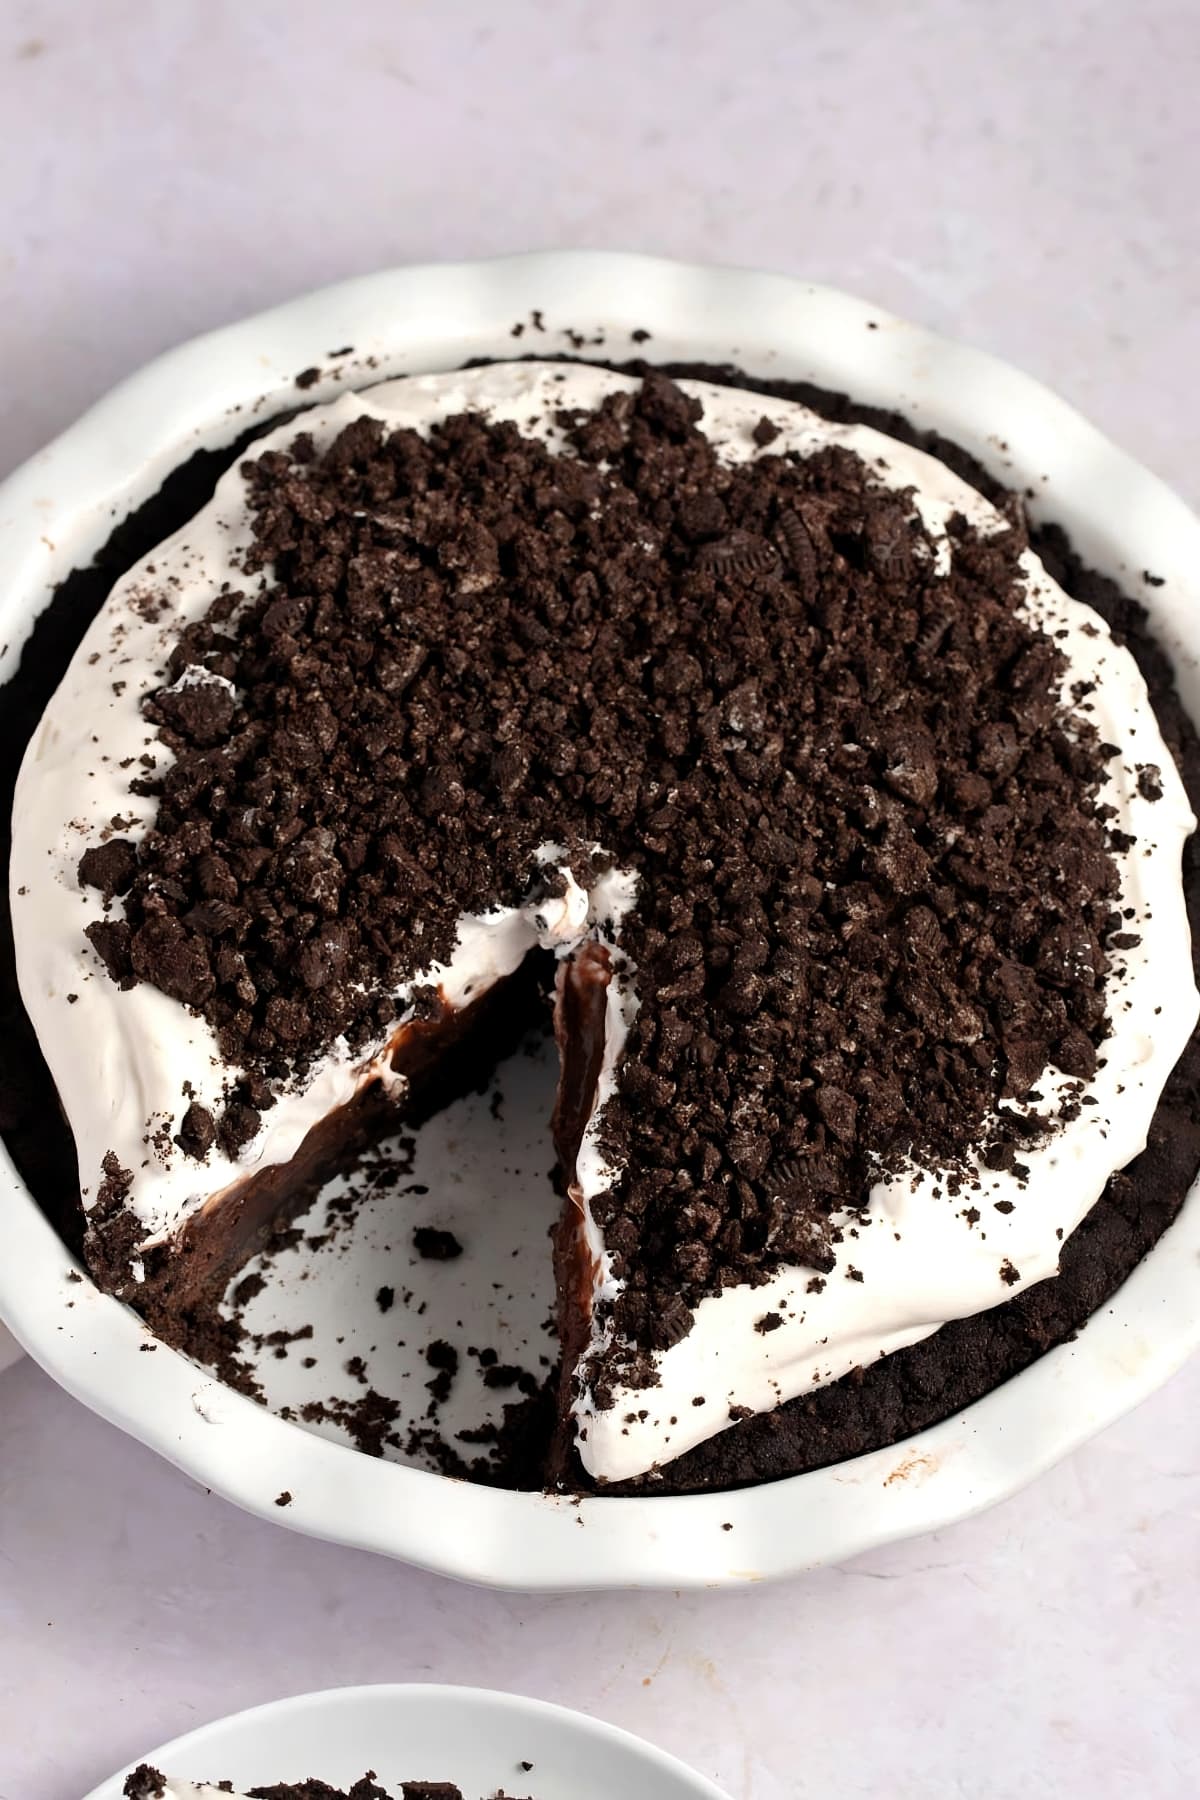 Homemade Mississippi Mud Pie with Oreo Crumbs